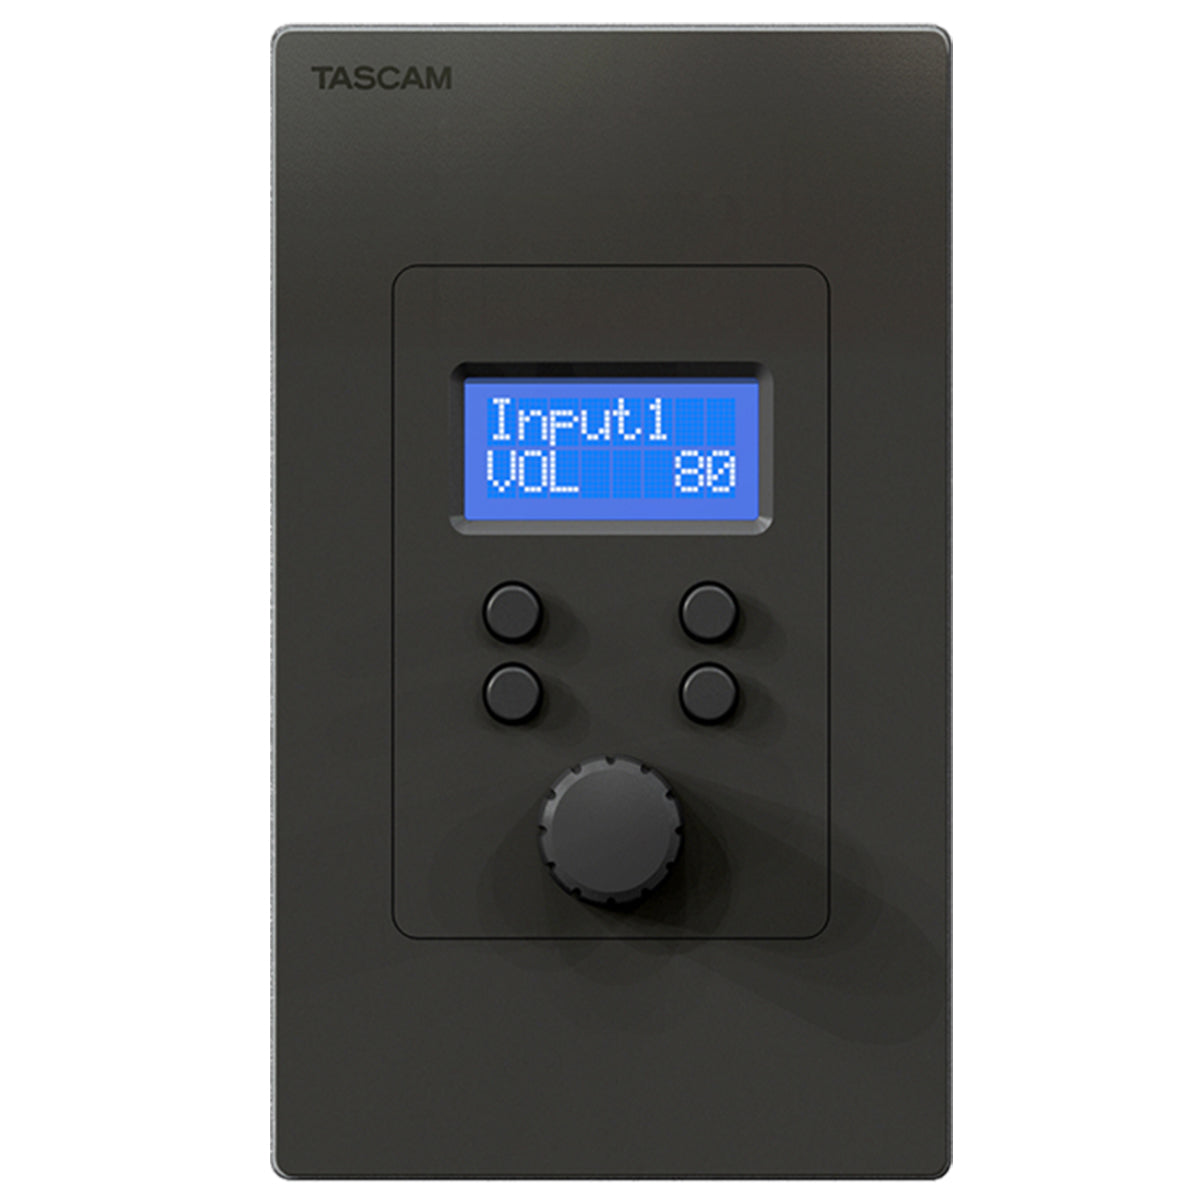 Tascam RC-W100-R120 Wall Mount Controllers for Tascam MX-8A